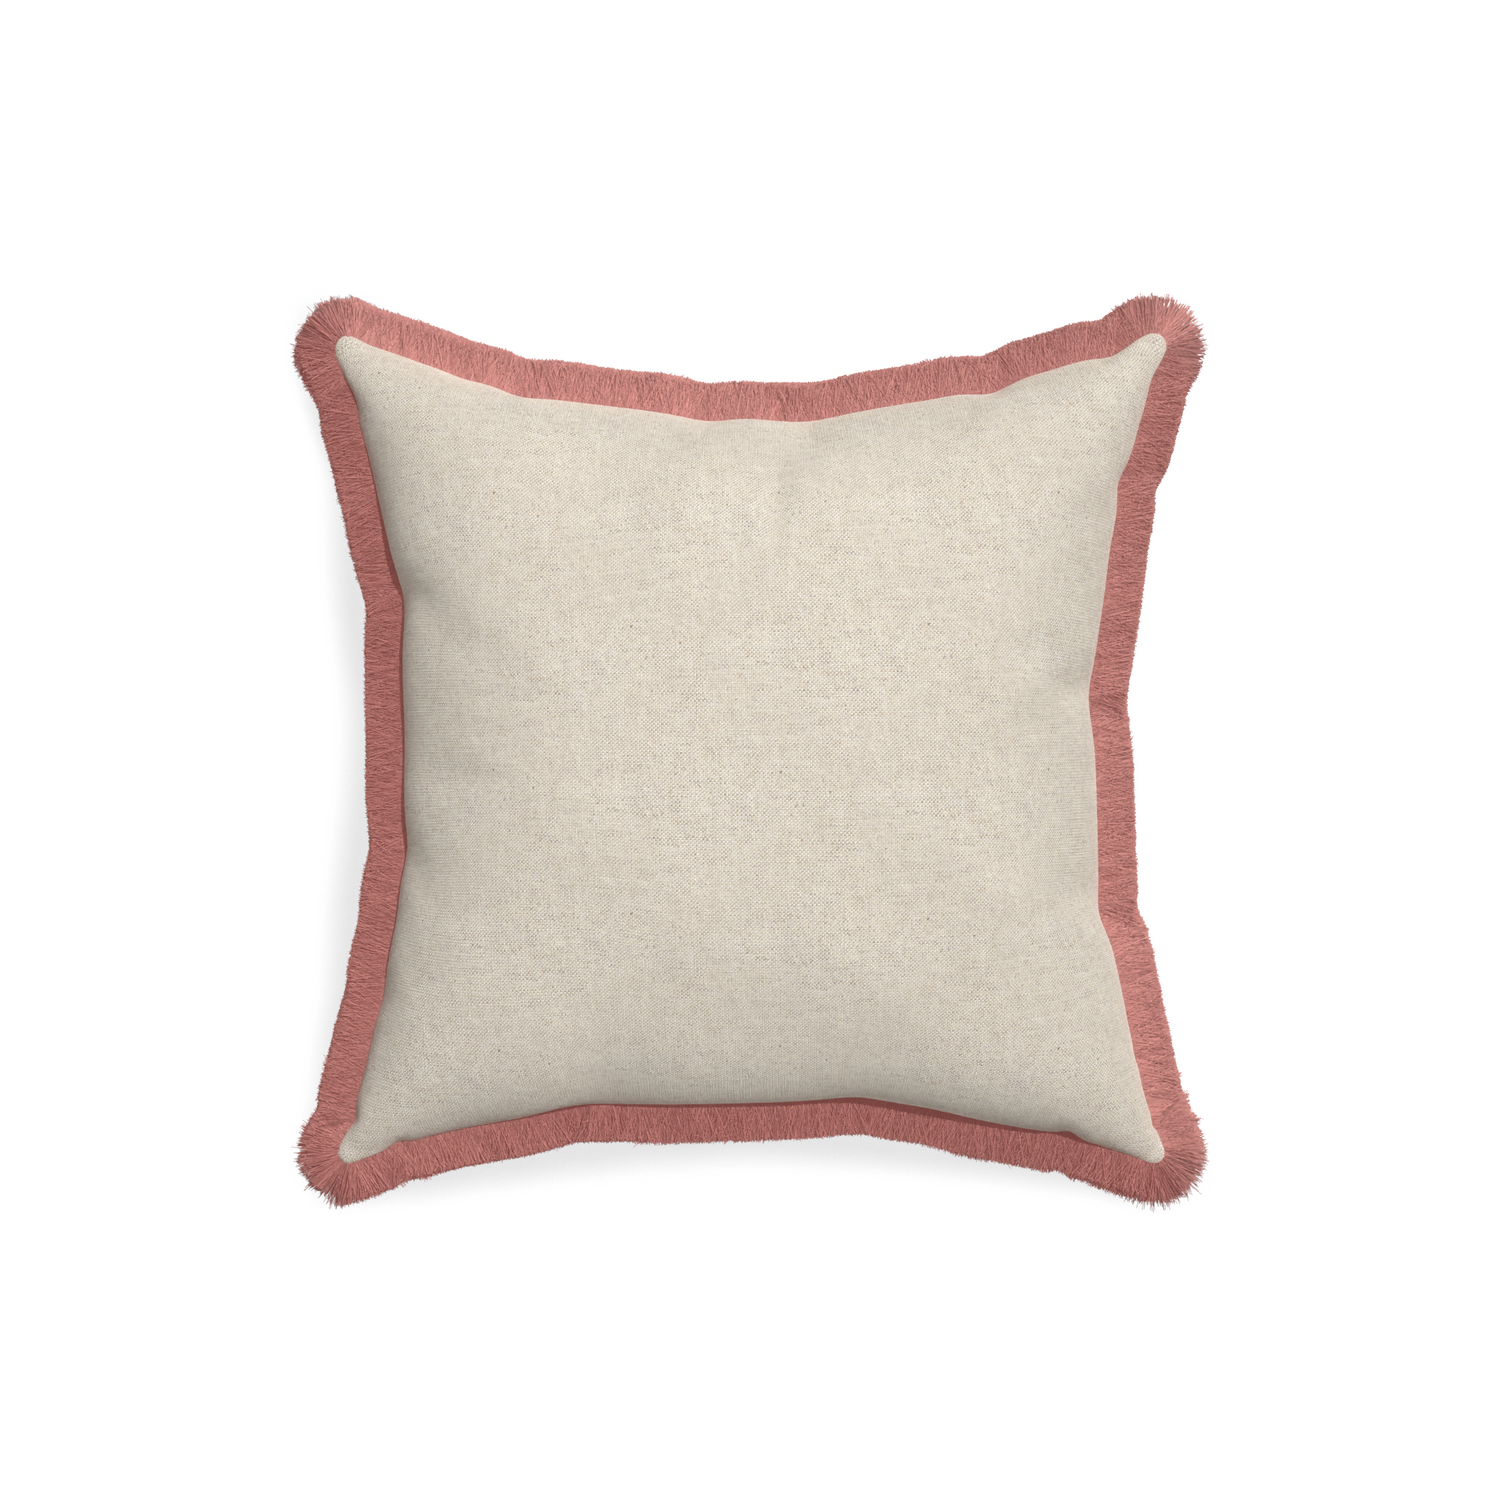 18-square oat custom light brownpillow with d fringe on white background